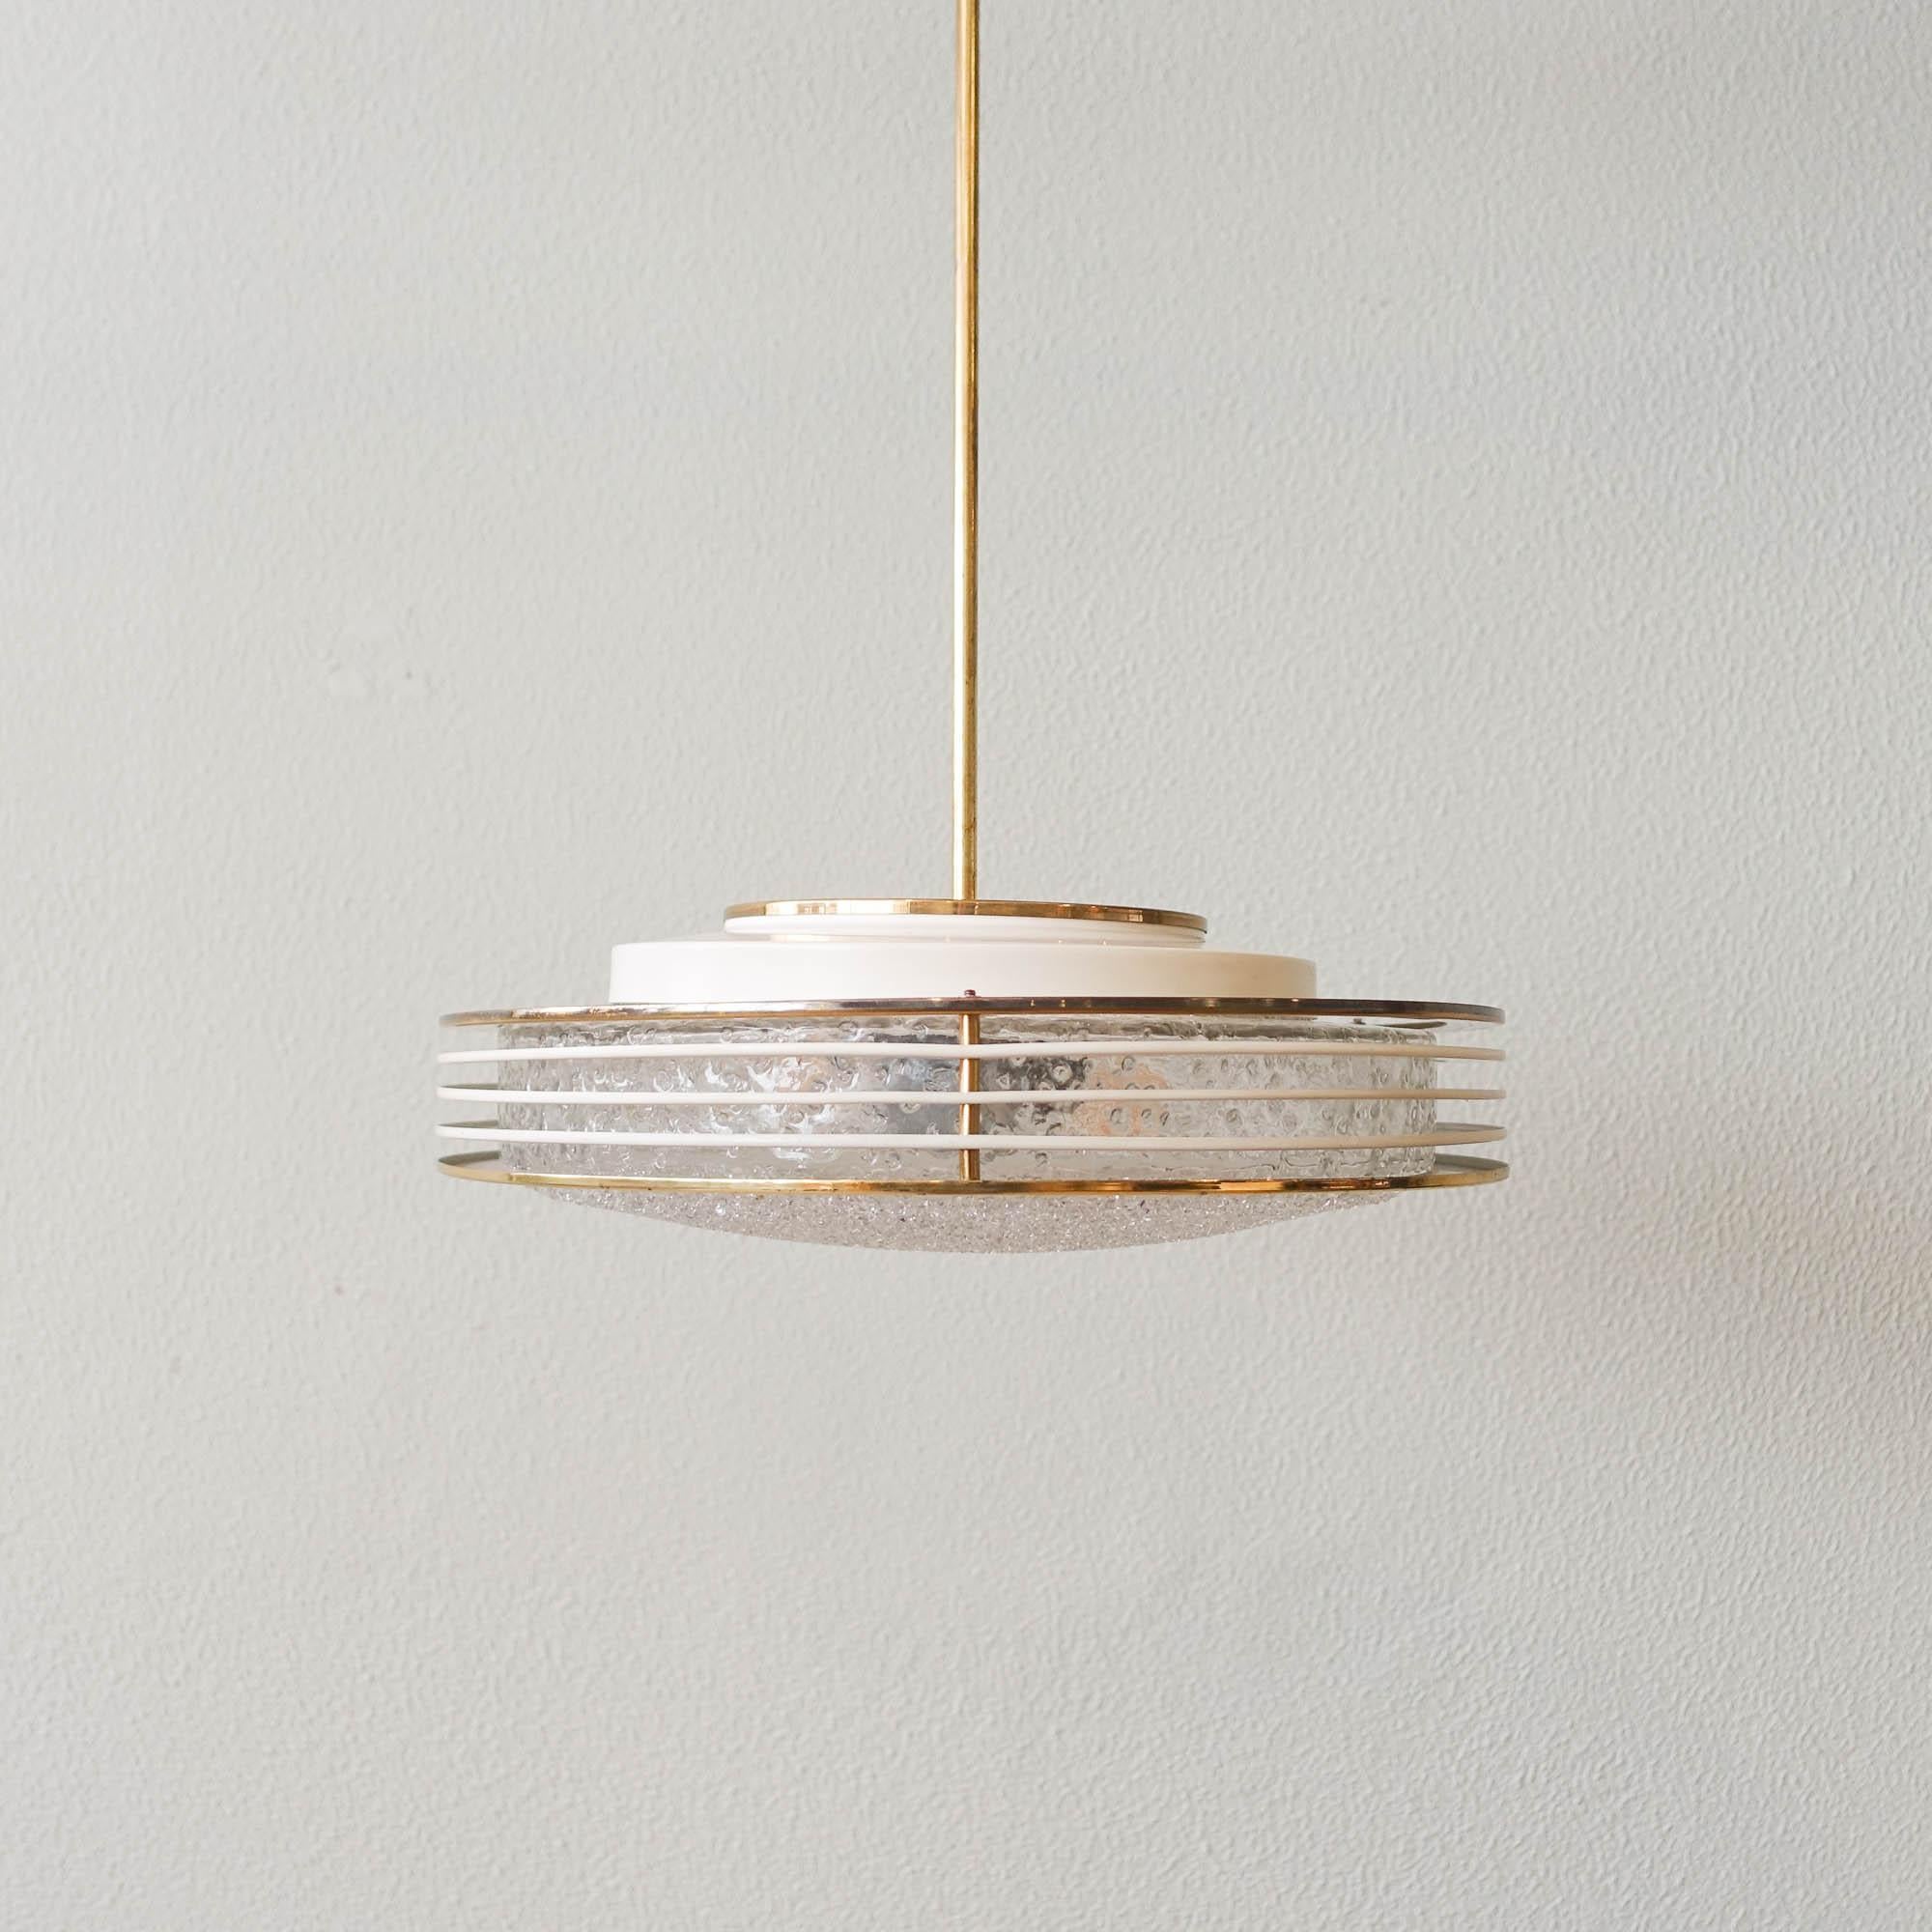 This Saturno ceiling lamp was produced by Doria Leuchten, in Germany, during the 1960s. The light has a round frosted glass disk with a high gloss brass ring around it and four brass rings over the first one. In very good vintage condition, with the